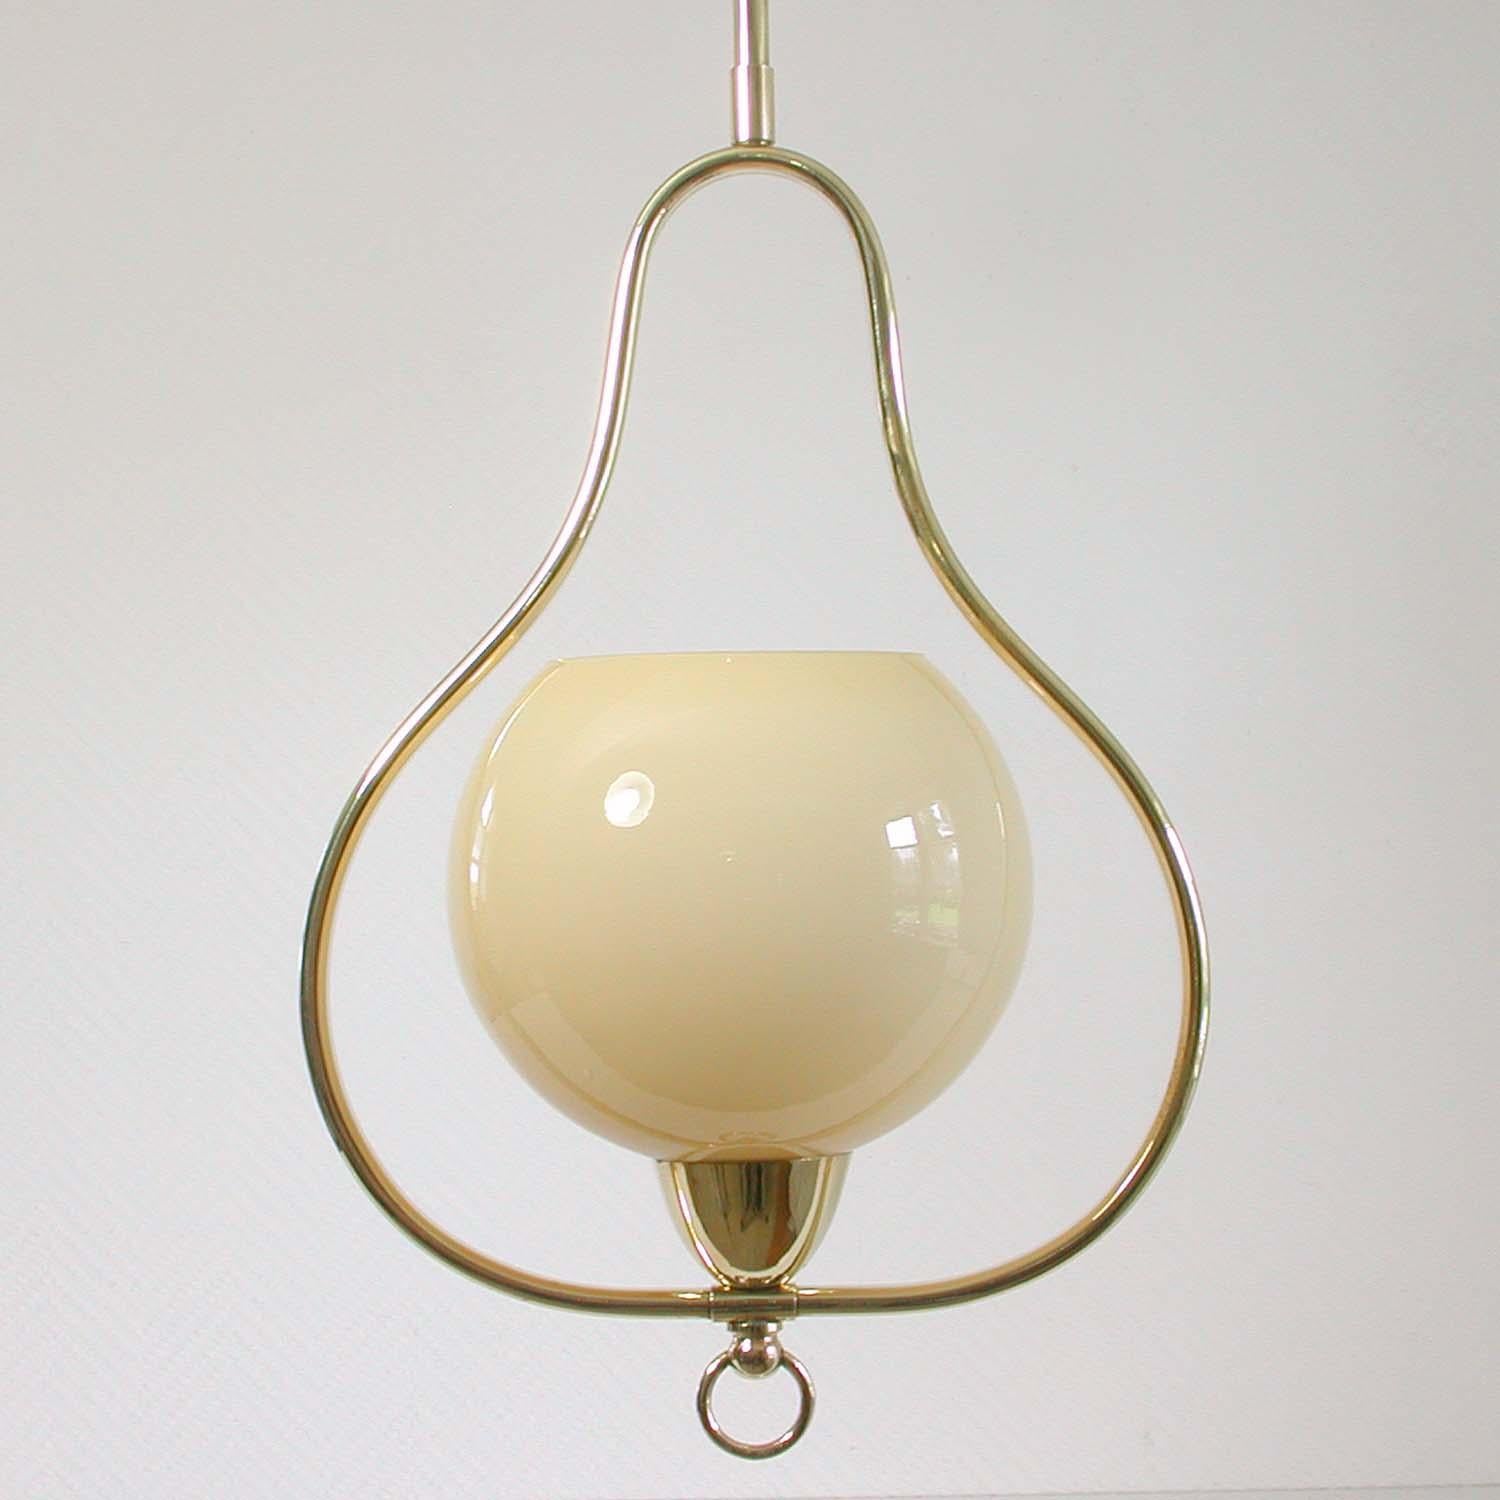 This elegant 1940s-1950s midcentury pendant was designed and manufactured in Italy.

The lamp is made of brass and has got a cream colored opaline lamp shade. The lamp has been rewired. This light can be used in every country of the world. It